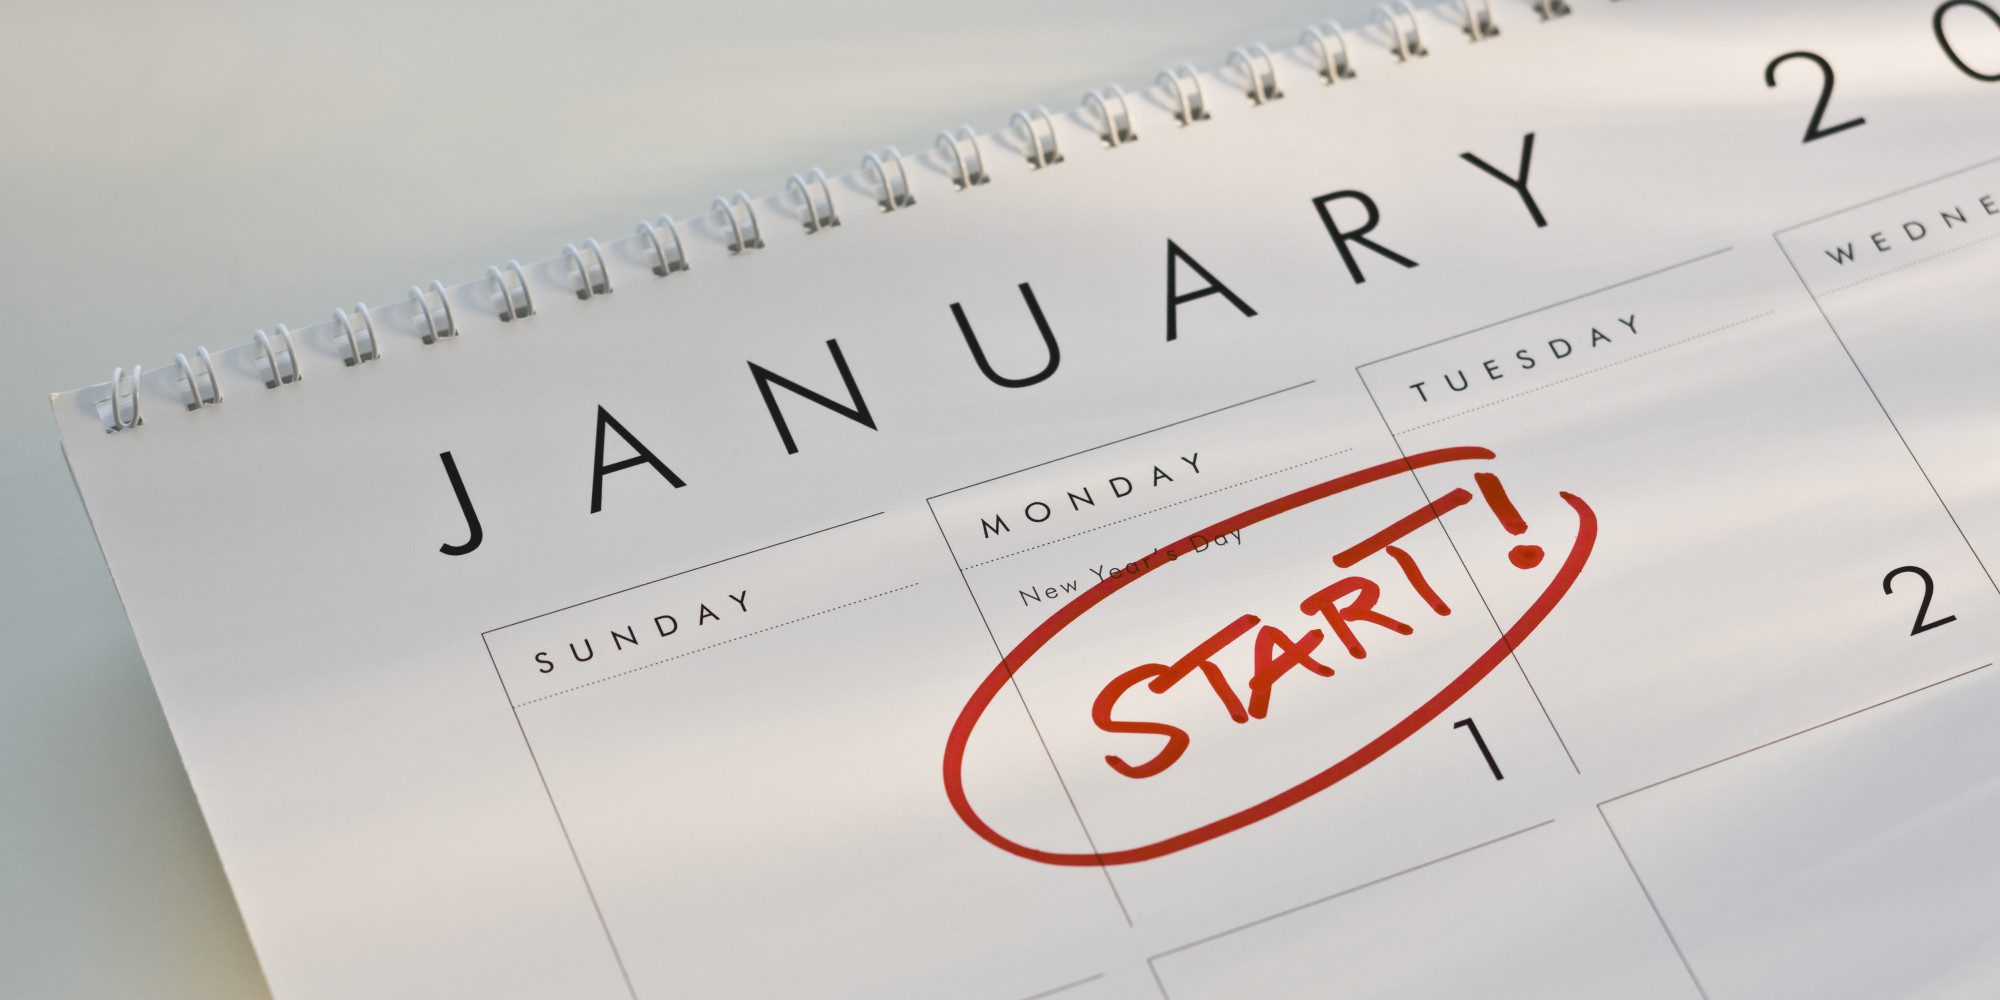 Calendar with the word "start" circled on January 1st.